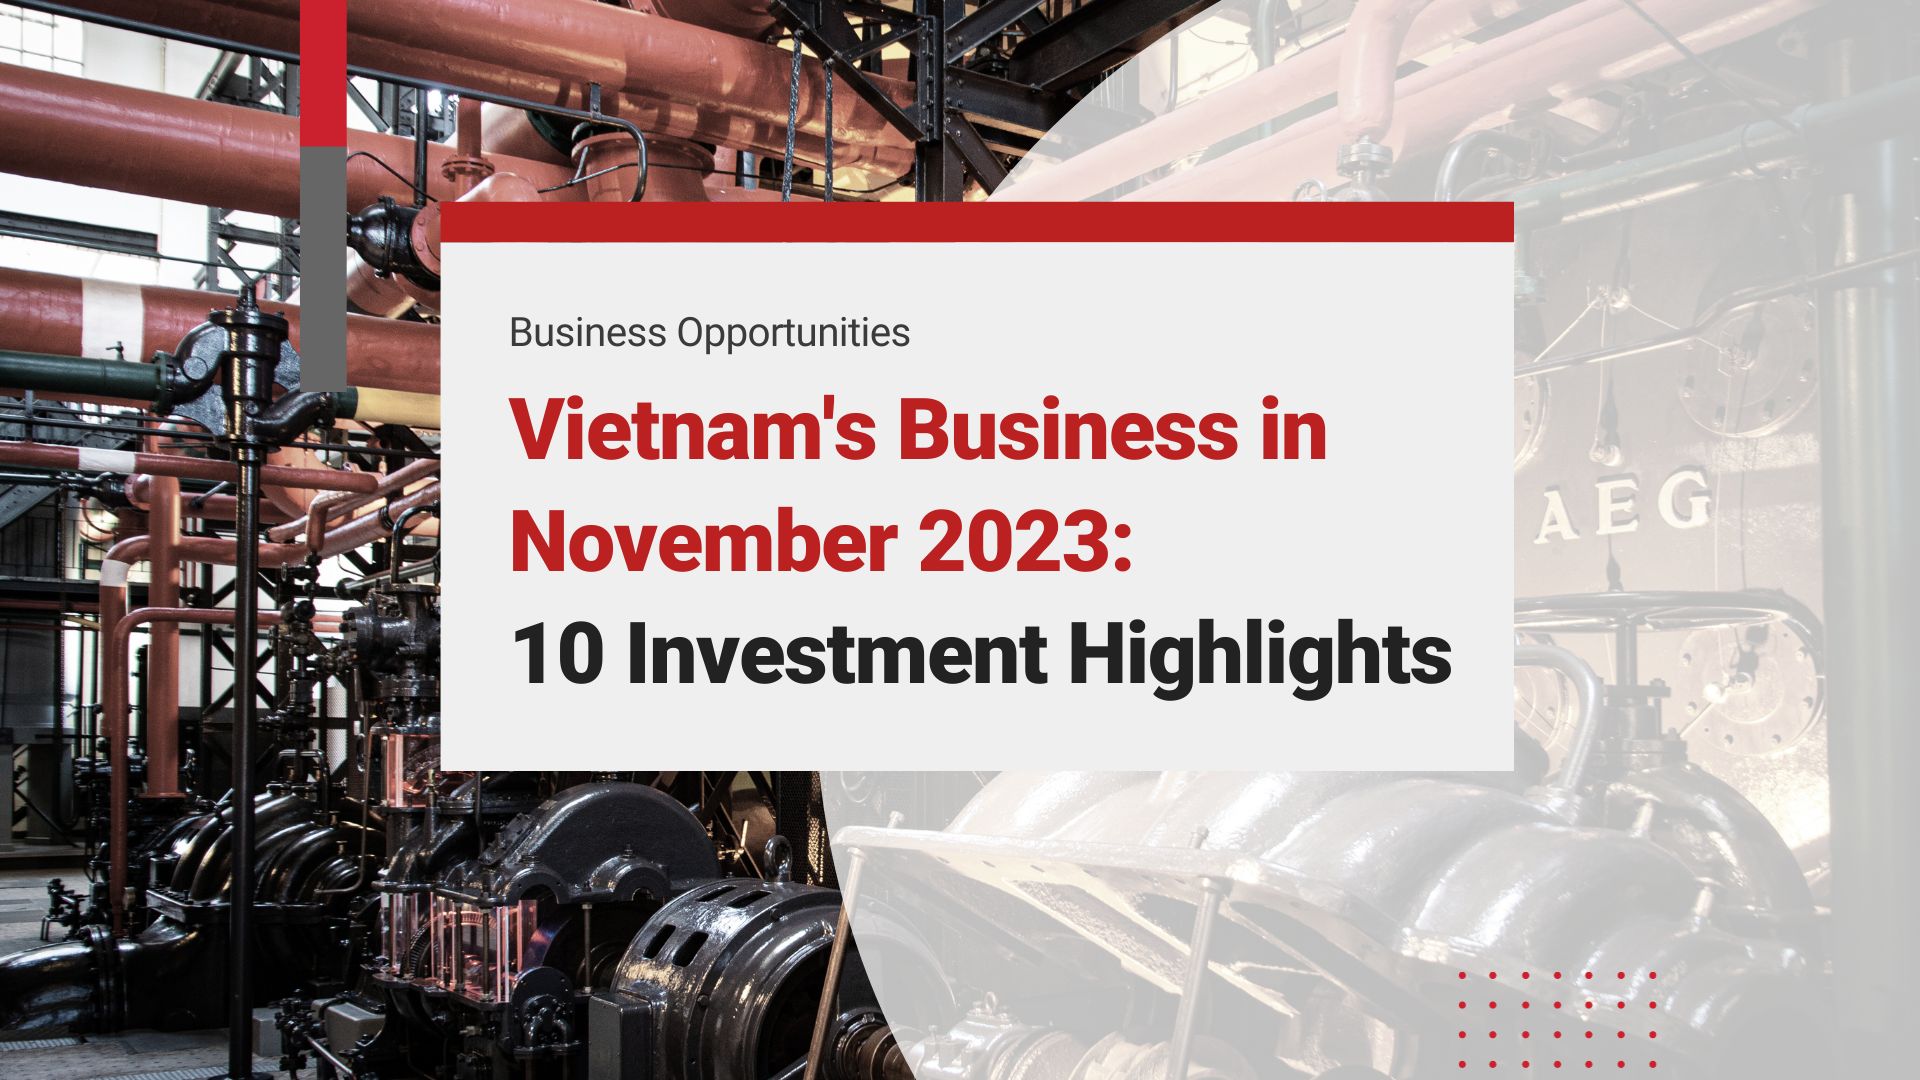 Investment Highlights in Vietnam: 10 Business Insights in November 2023